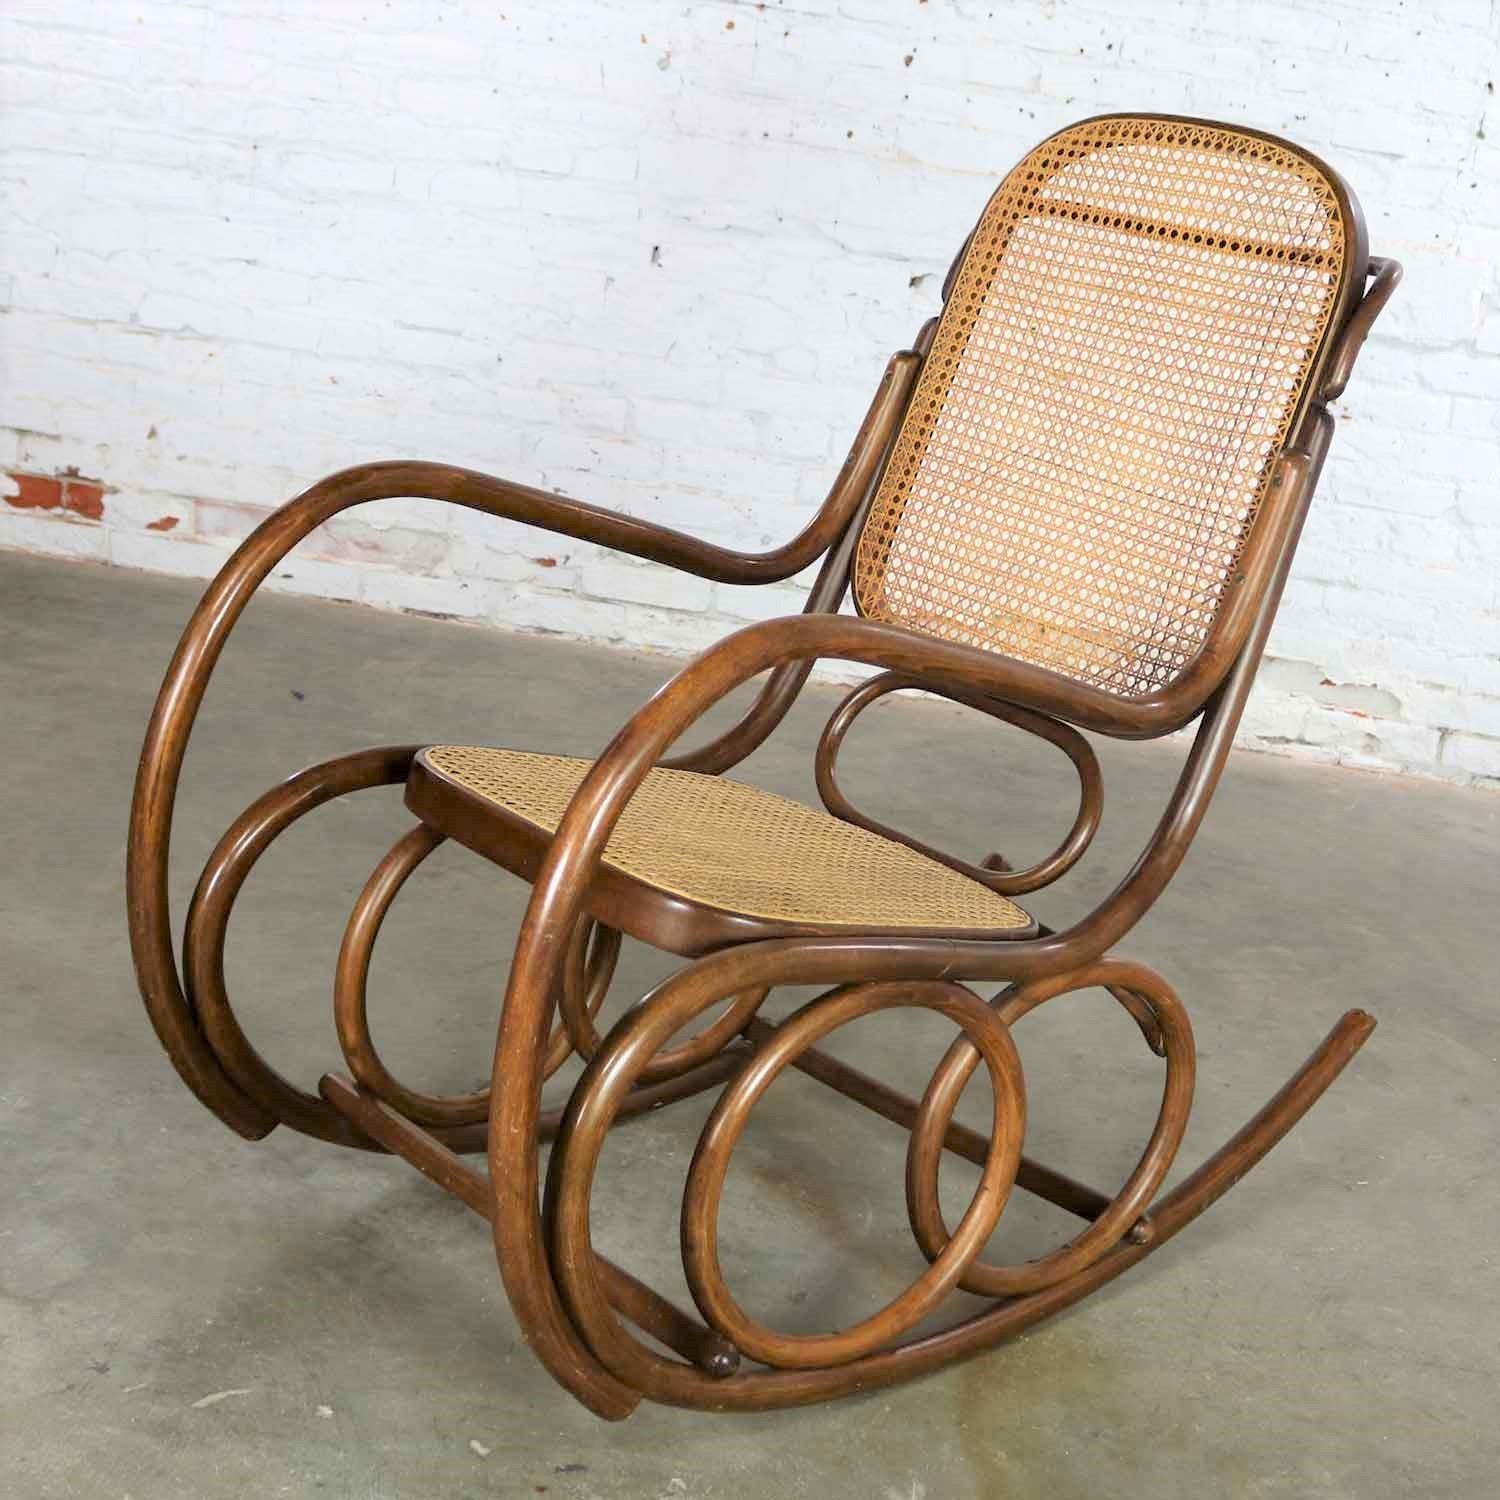 Handsome bentwood and cane double circle design rocker with handle by Thonet for Stendig. It retains its original oval Stendig handmade in Czechoslovakia sticker as well as an ink stamp. It is in wonderful vintage condition with no outstanding flaws